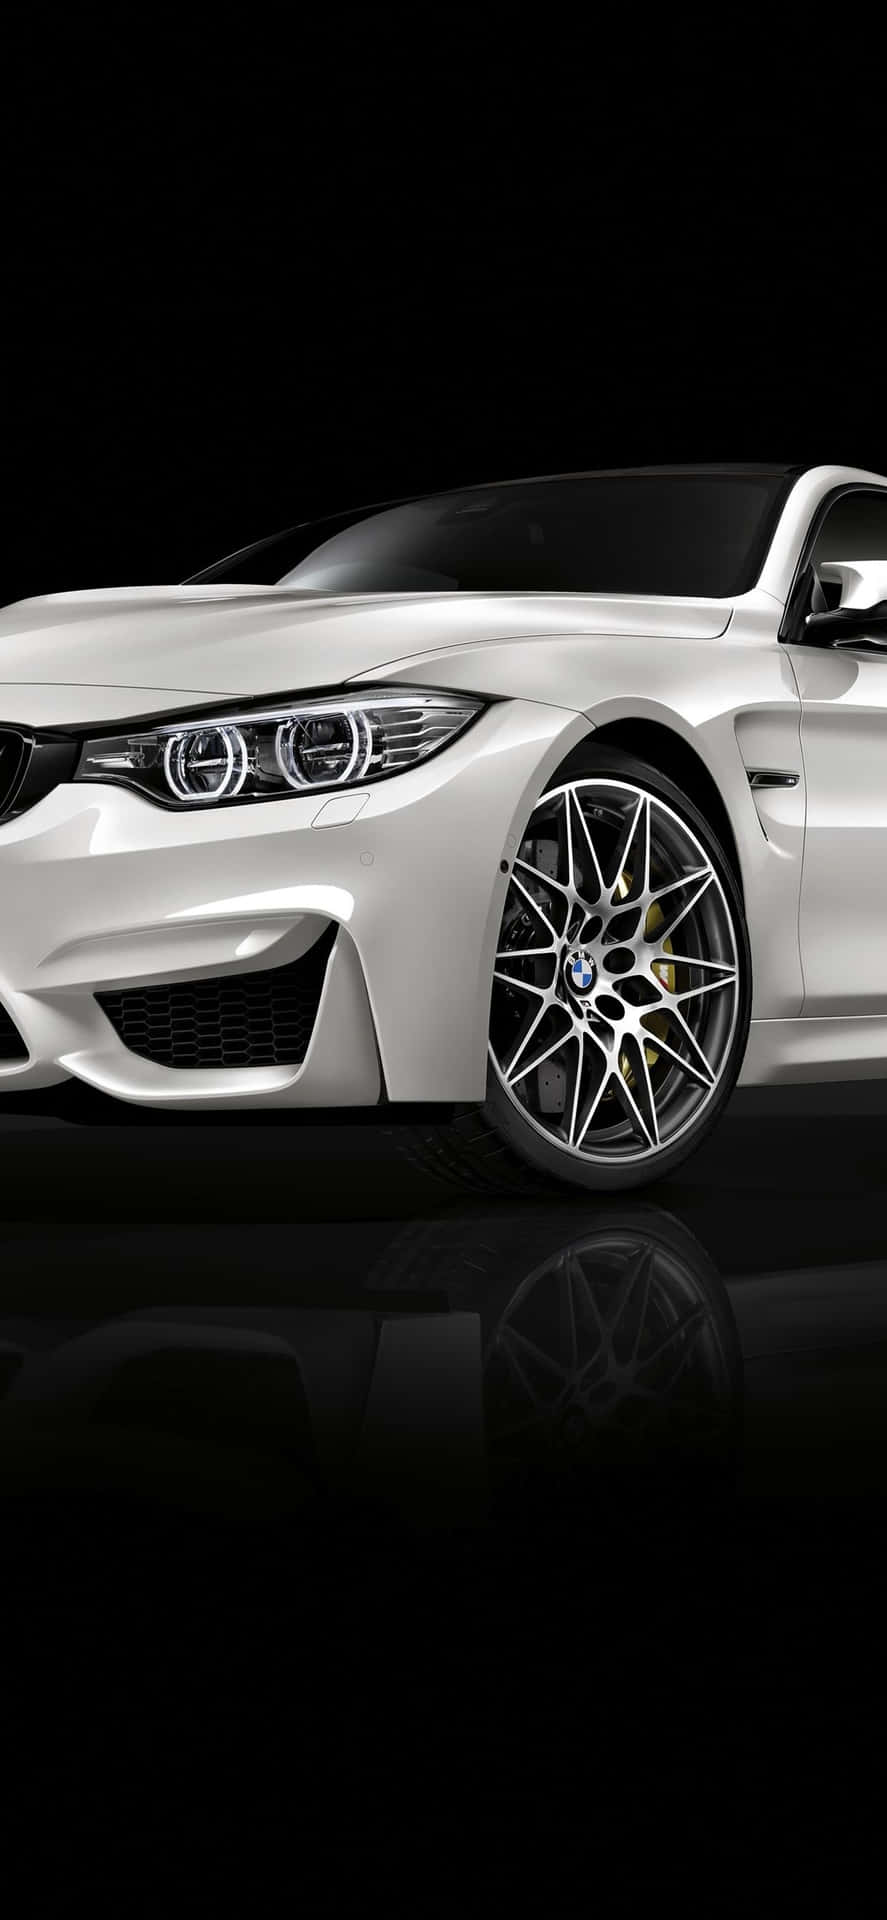 Get The Latest BMW Model Now Installed On Your iPhone Wallpaper